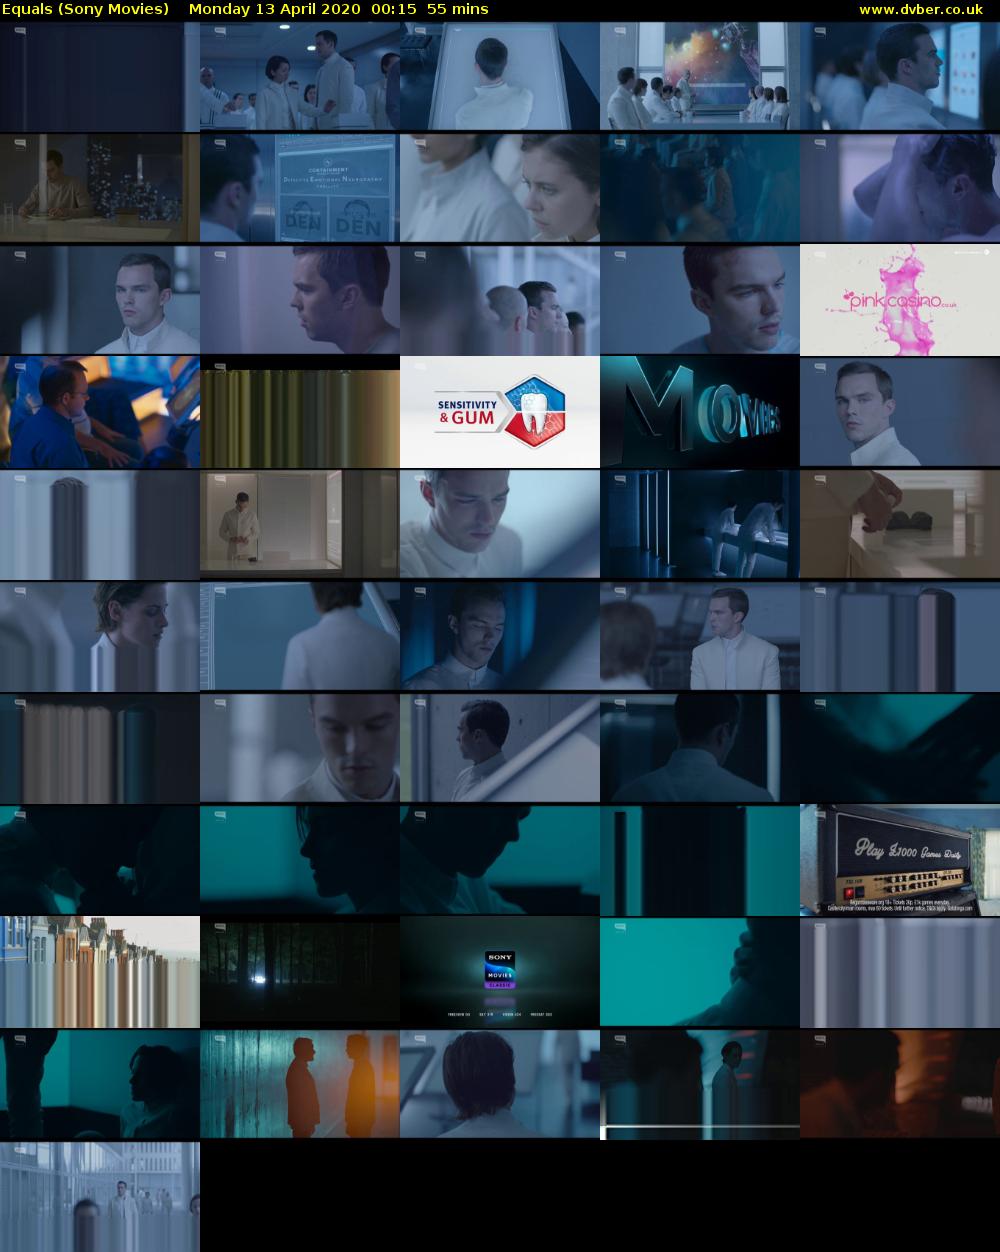 Equals (Sony Movies) Monday 13 April 2020 00:15 - 01:10